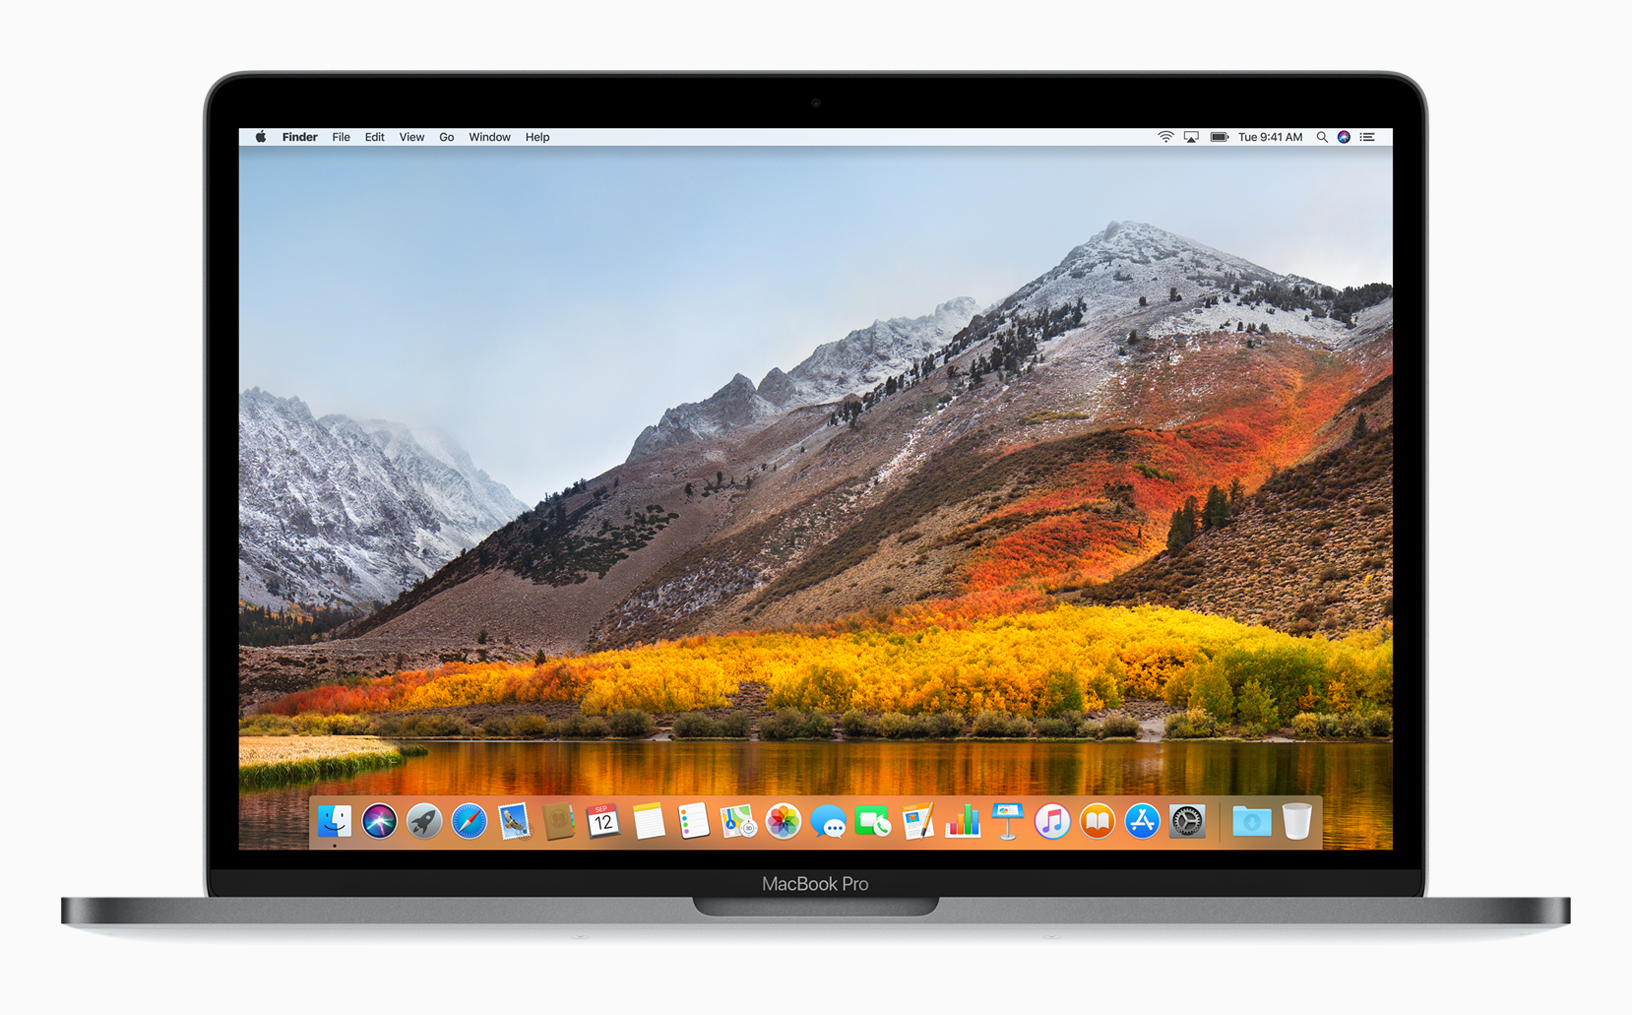 Mac users can now upgrade to macOS High Sierra for free